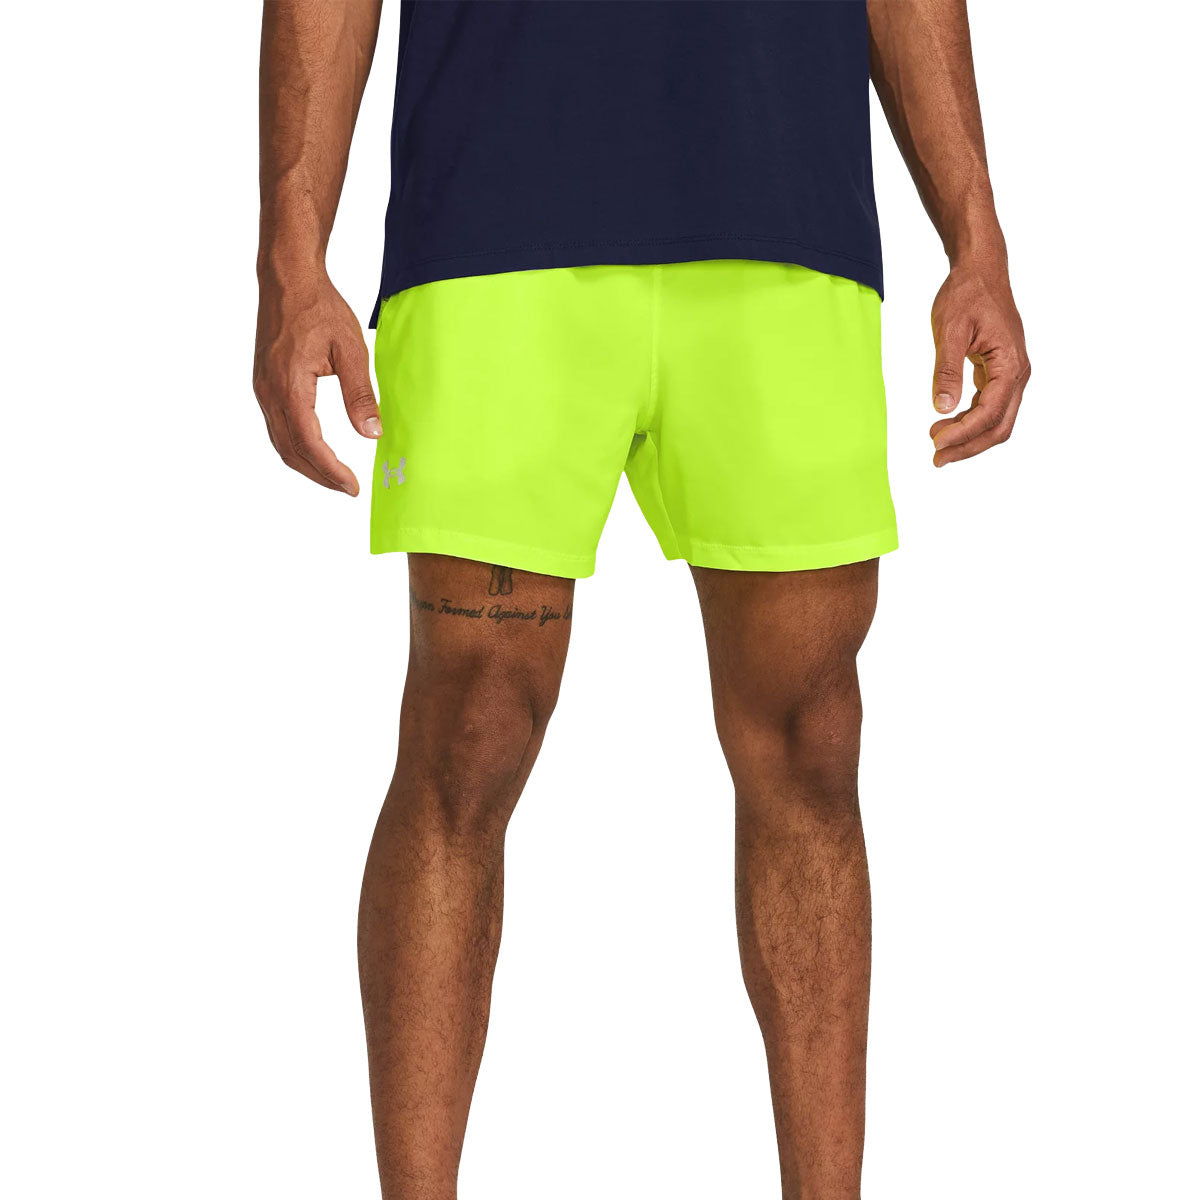 Under Armour Launch 5 inch Running Shorts - Mens - High Vis Yellow/Reflective